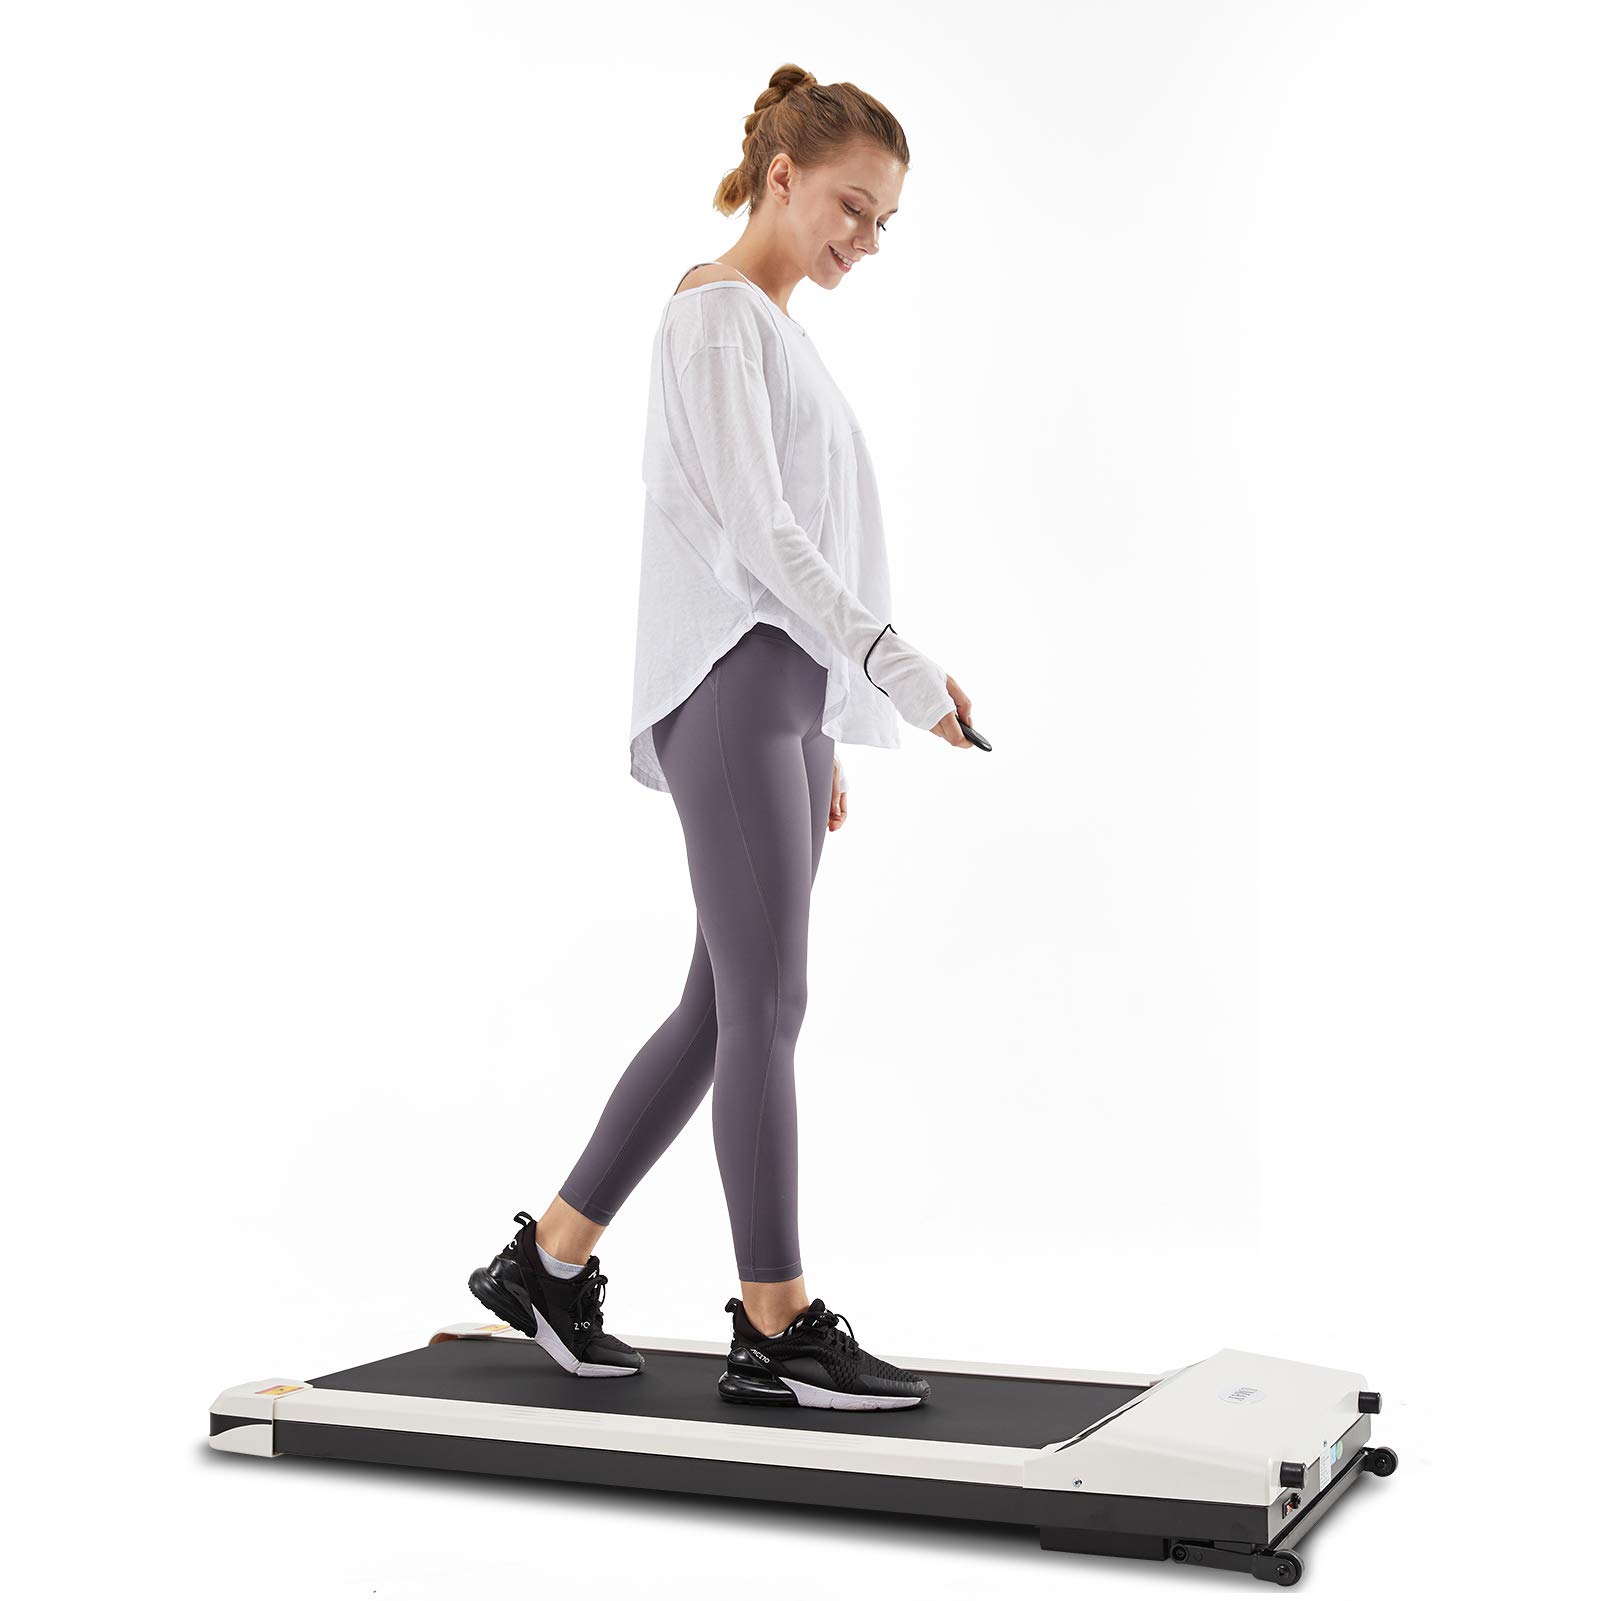 UMAY Walking Pad 512, Under Desk Treadmill with Incline 512N, Small Treadmill P1, Ultra Quiet Walking Treadmill for Home Office with Remote Control, SPAX APP and LED Display, Installation-Free